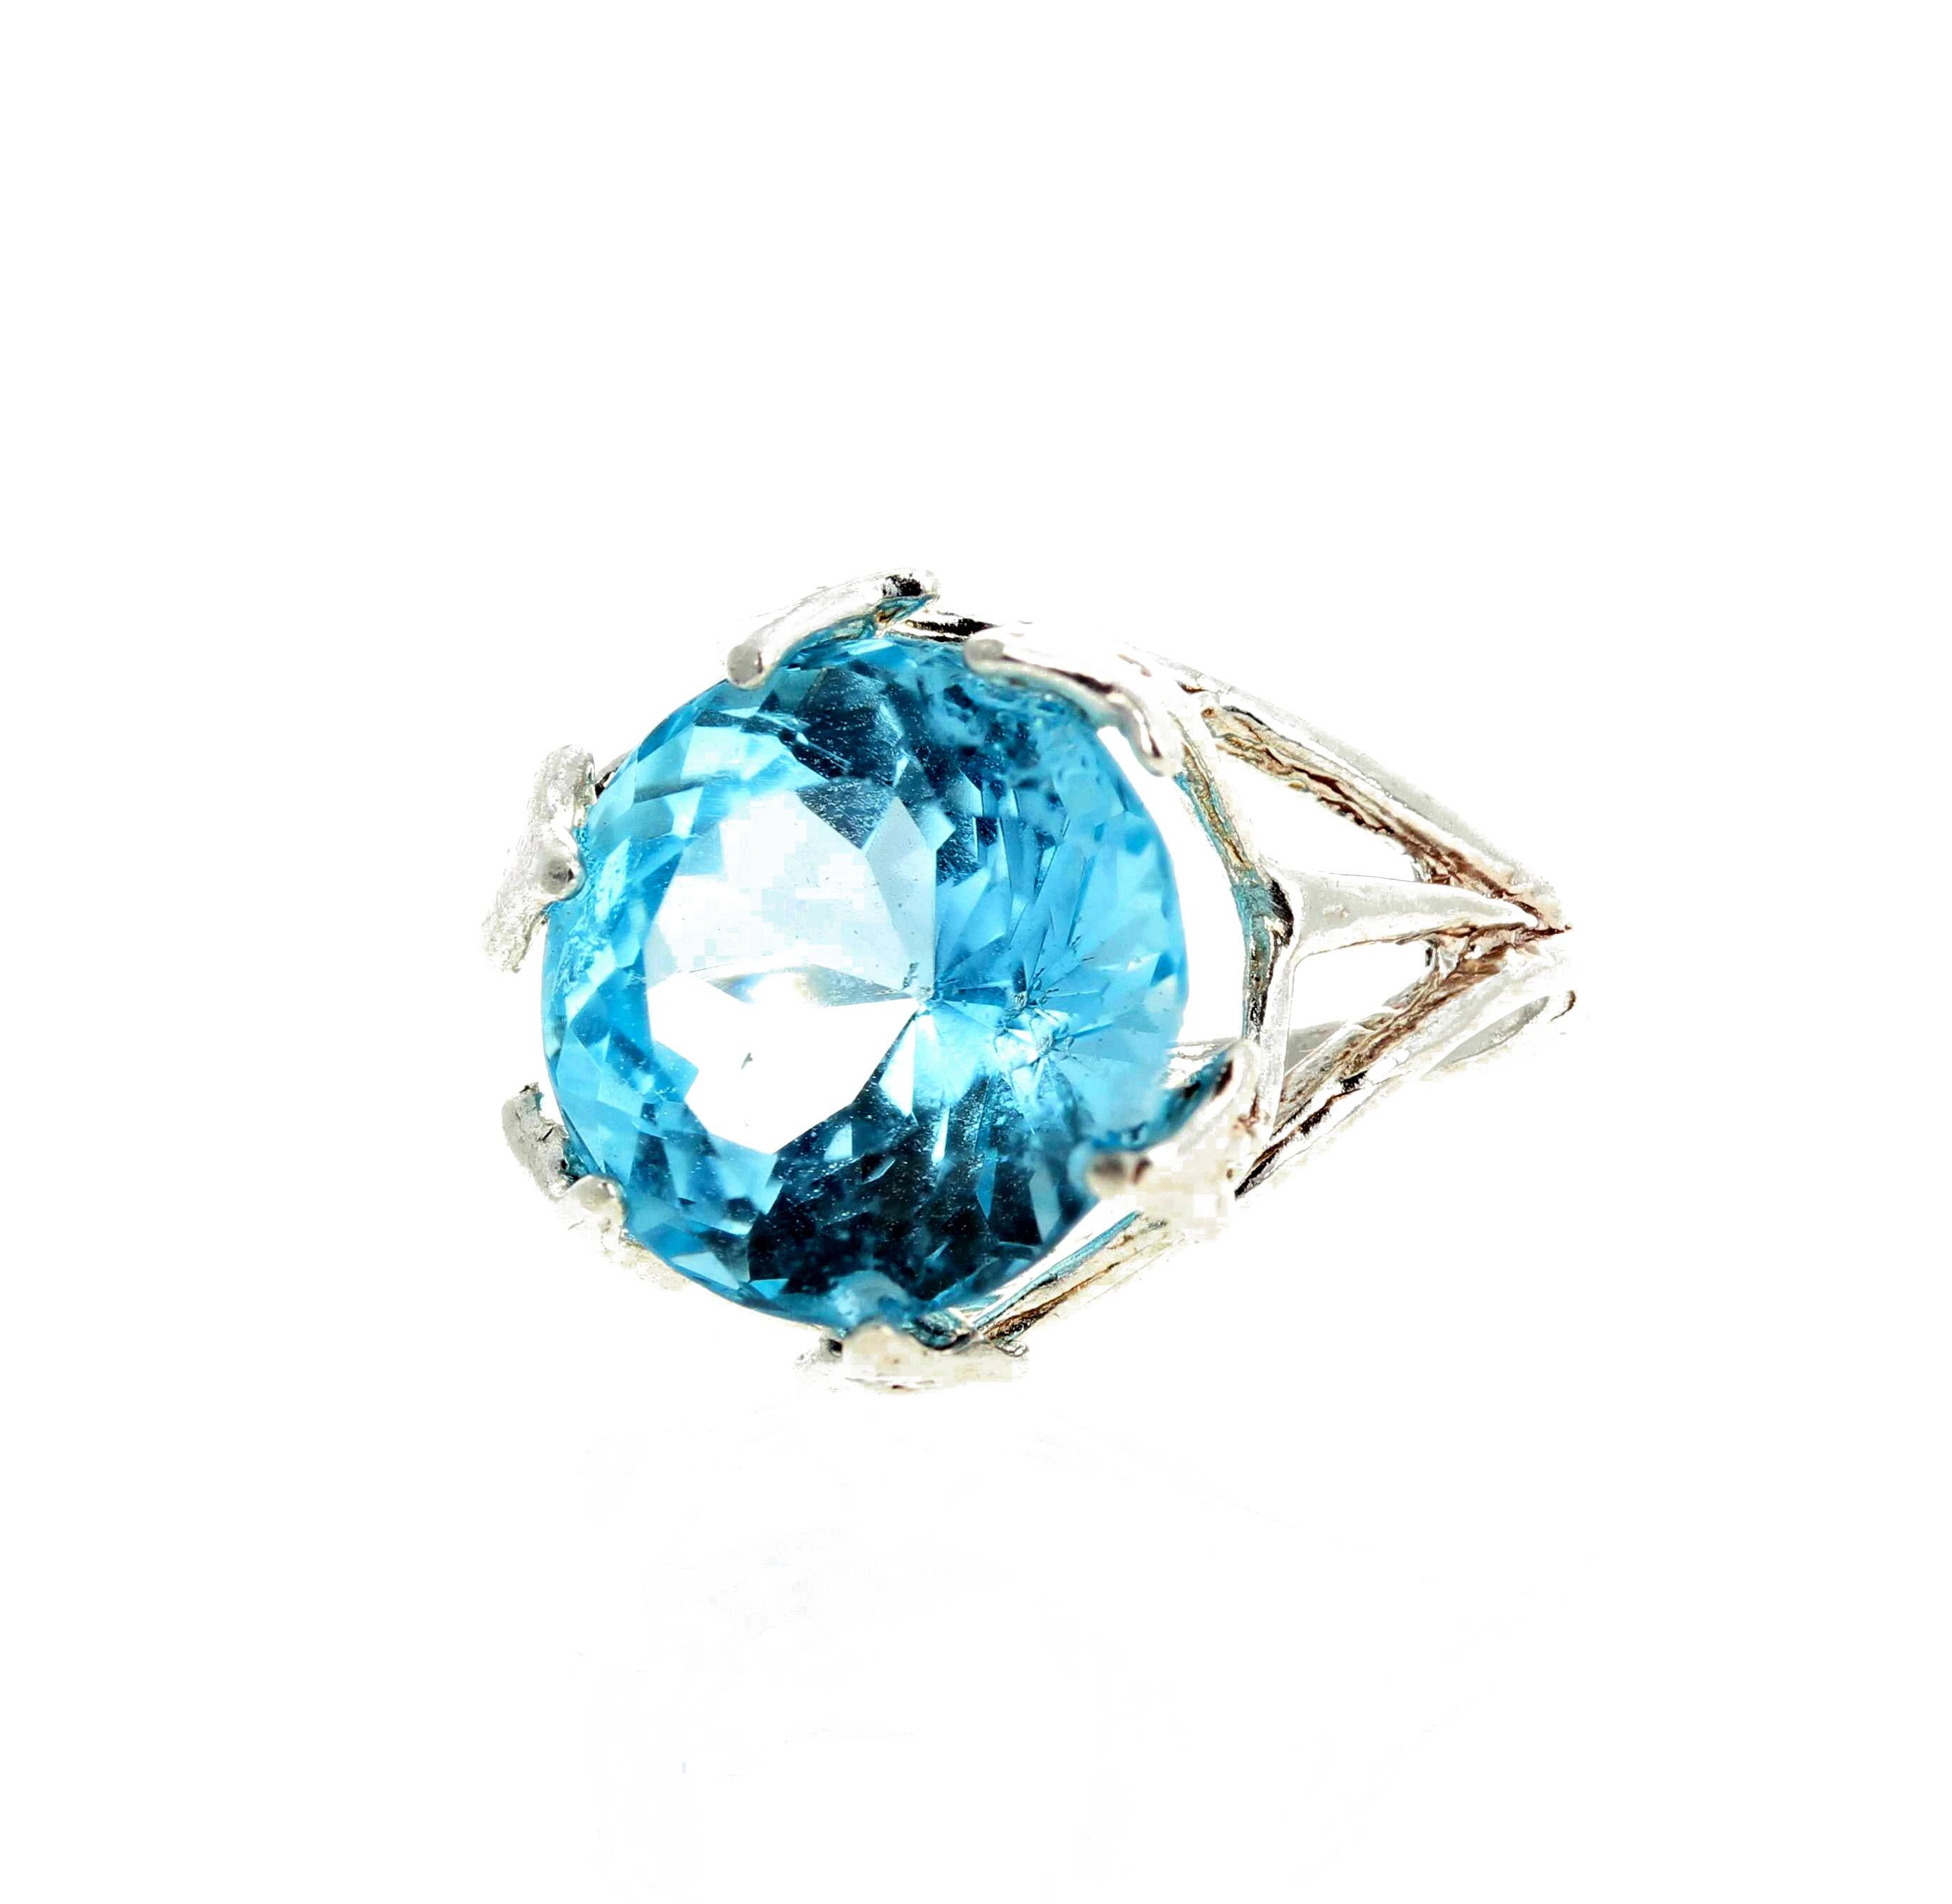 Gemjunky Razzle Dazzle Natural 10 Cts Sky Blue Topaz Sterling Silver Ring 1